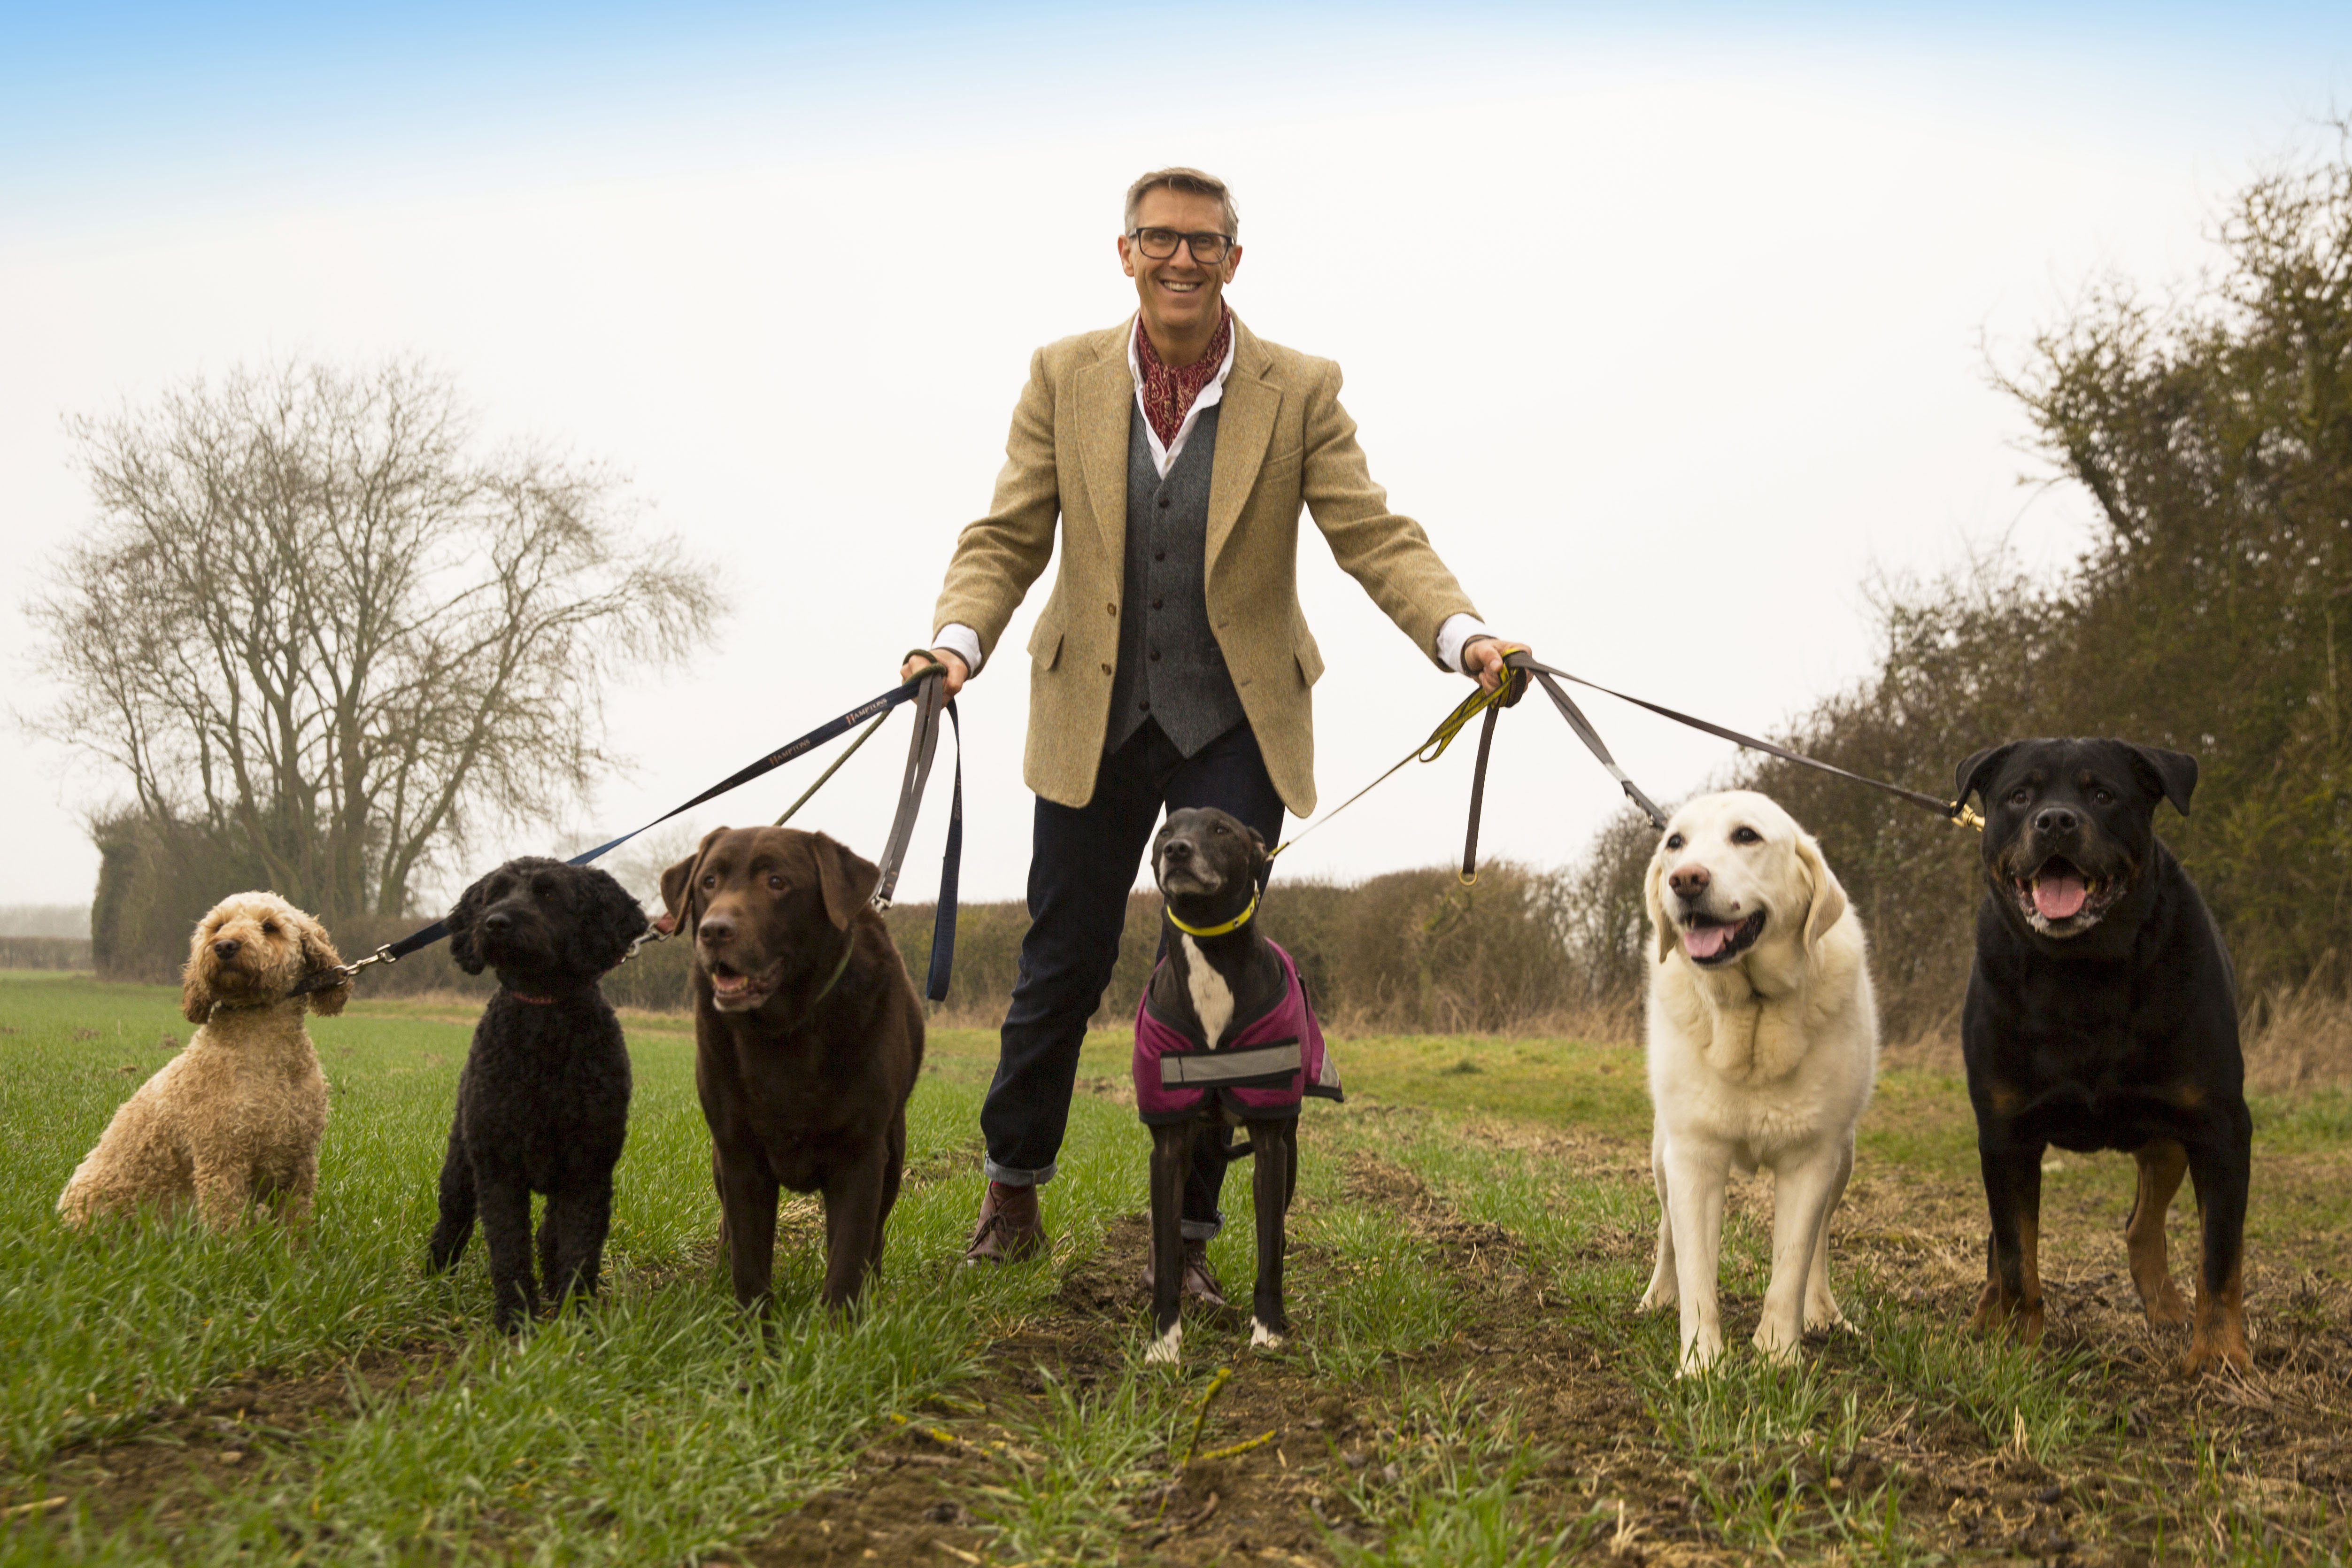 CHANNEL 4 TO LAUNCH BRAND NEW DOG SHOW WITH MAJOR NEW CANINE MANAGEMENT EXPERT TO COINCIDE WITH CRUFTS